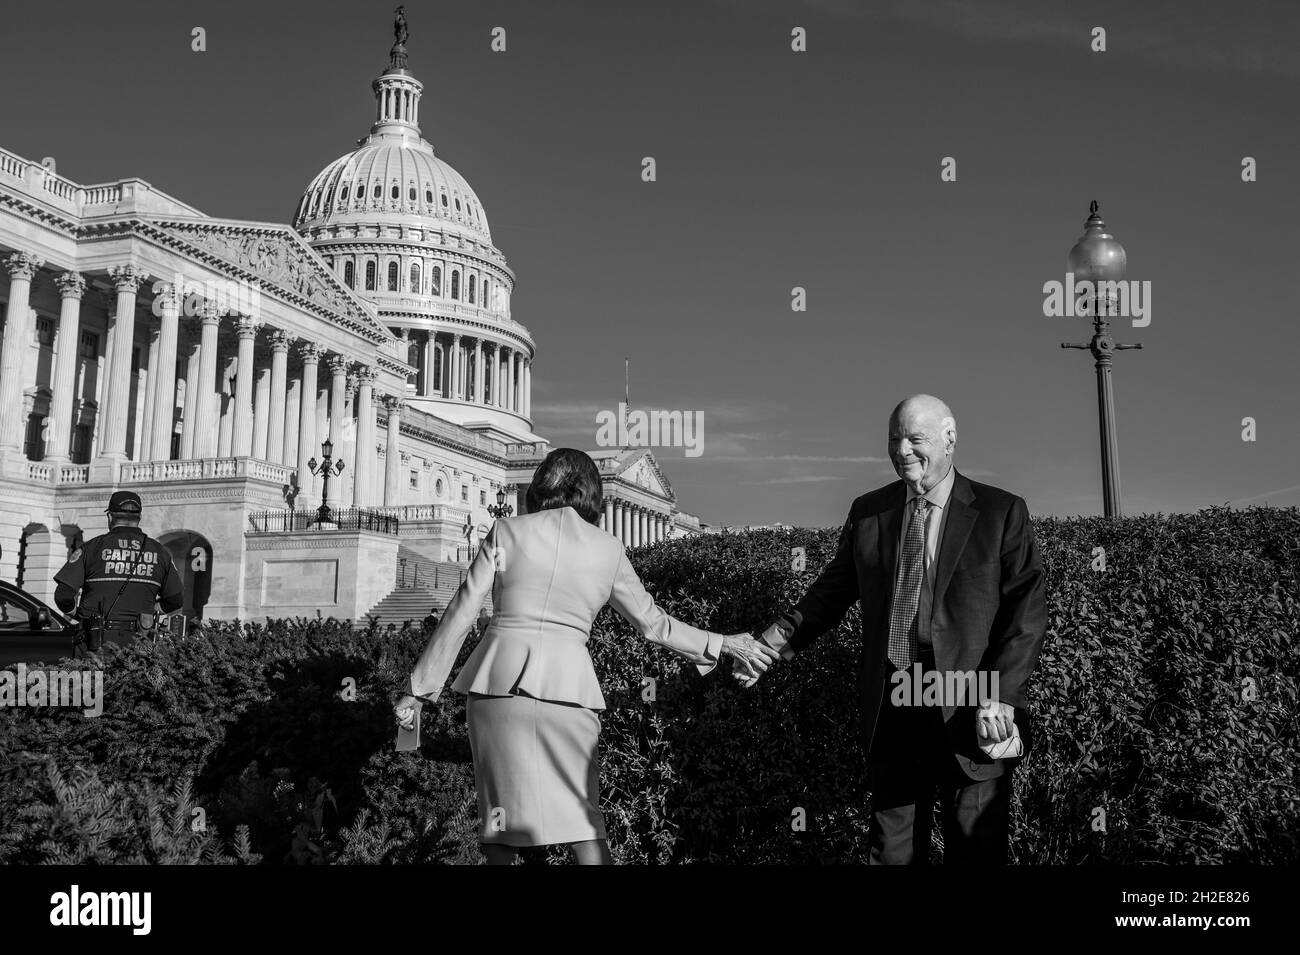 Washington, United States Of America. 21st Oct, 2021. Speaker of the United States House of Representatives Nancy Pelosi (Democrat of California), chats with United States Senator Ben Cardin (Democrat of Maryland) during a press conference on certification of the Equal Rights Amendment at the US Capitol in Washington, DC, Thursday, October 21, 2021. Credit: Rod Lamkey/CNP/Sipa USA Credit: Sipa USA/Alamy Live News Stock Photo